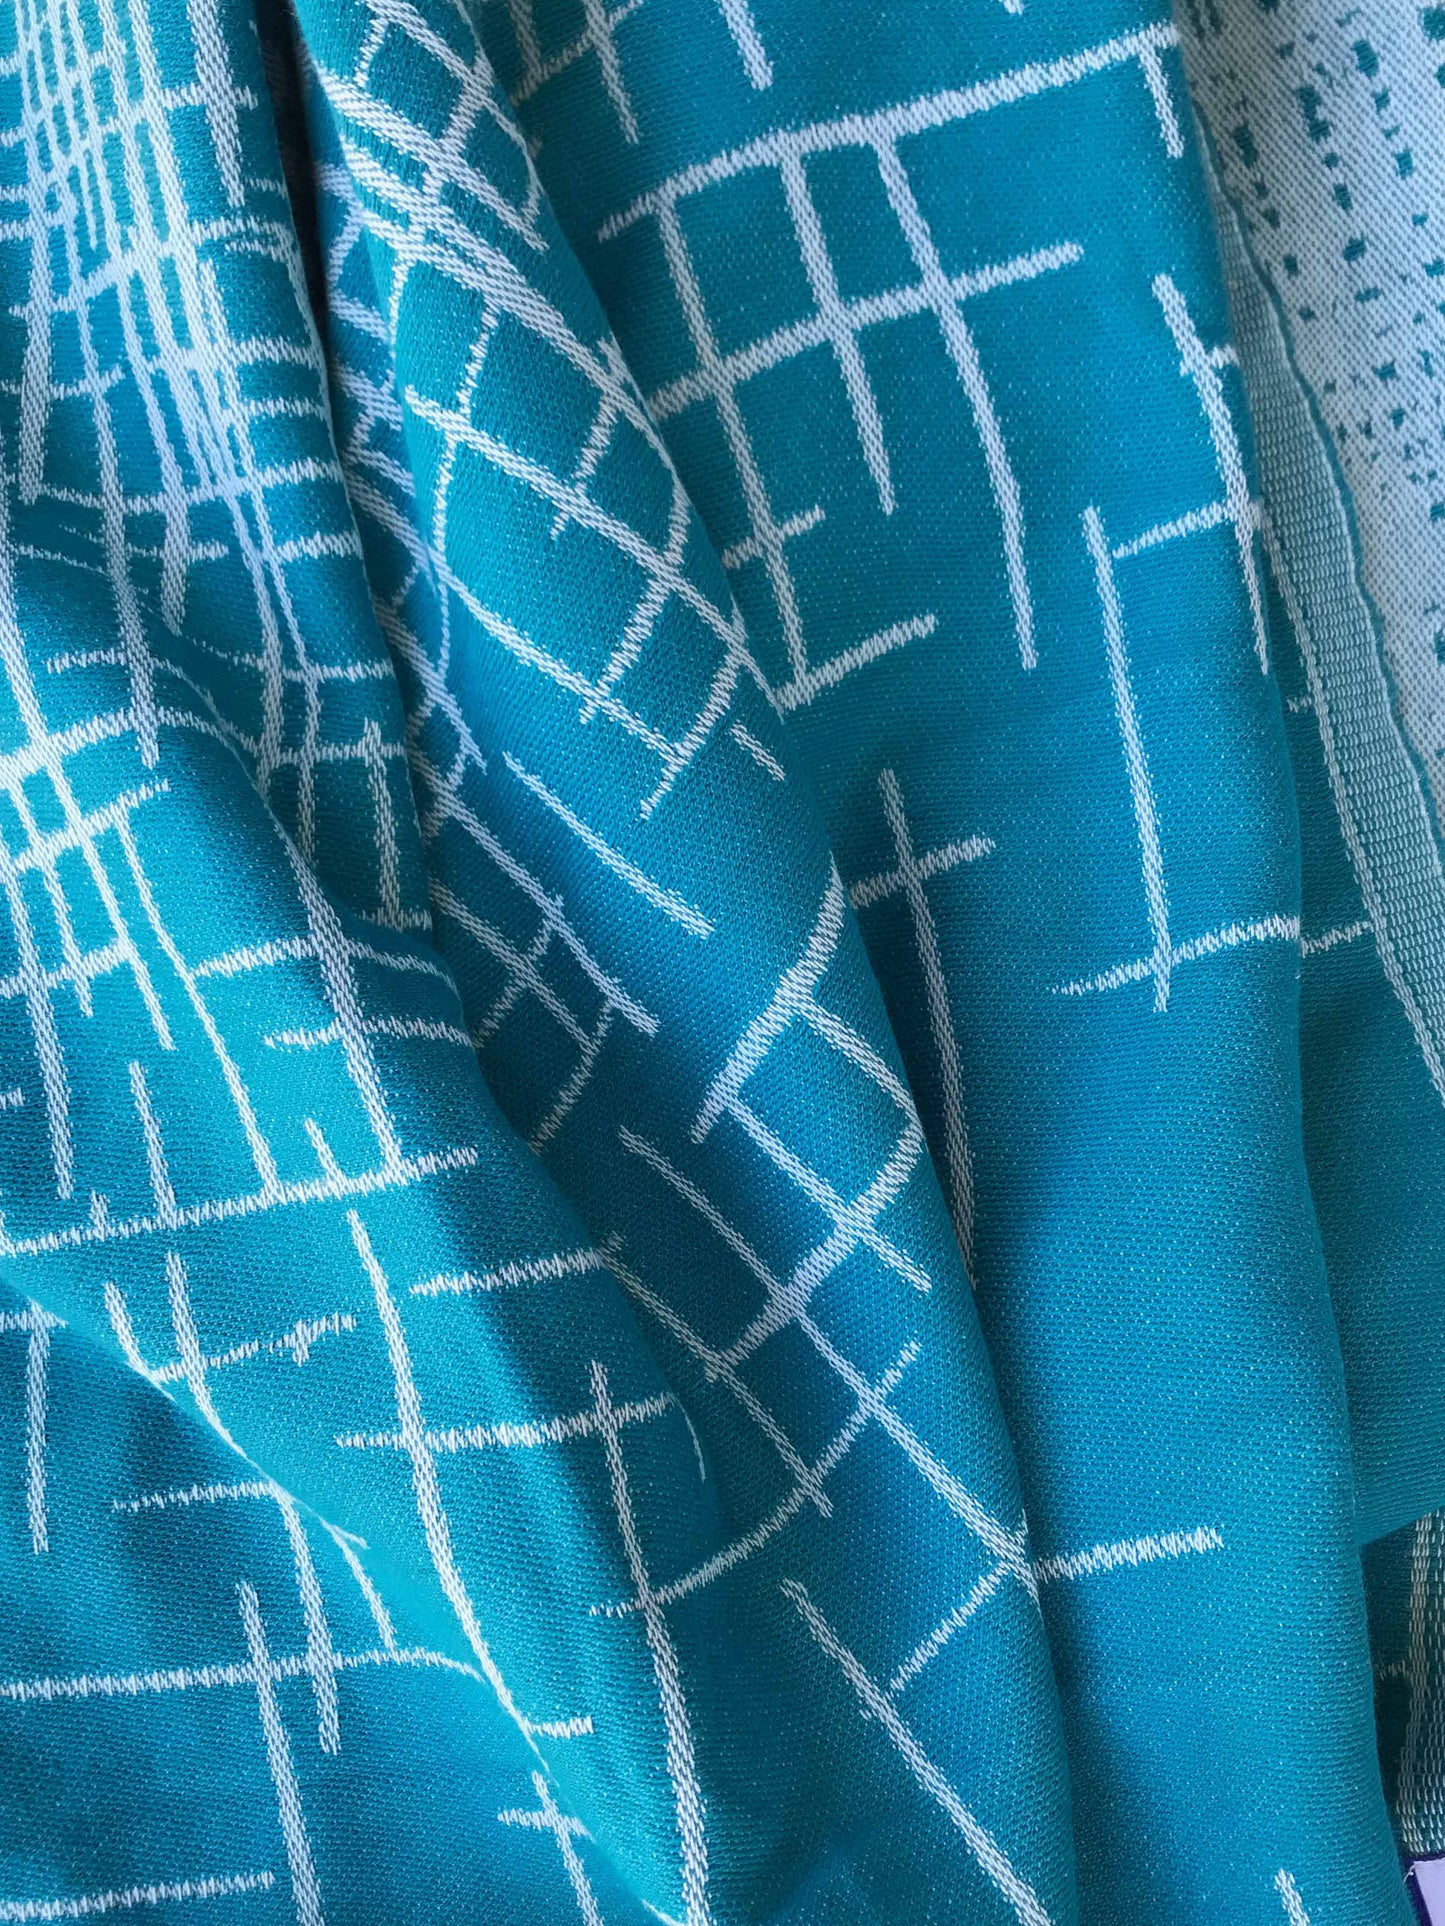 Marina Turkish Towel with pocket, close up on linear weave, sustainable beach towels